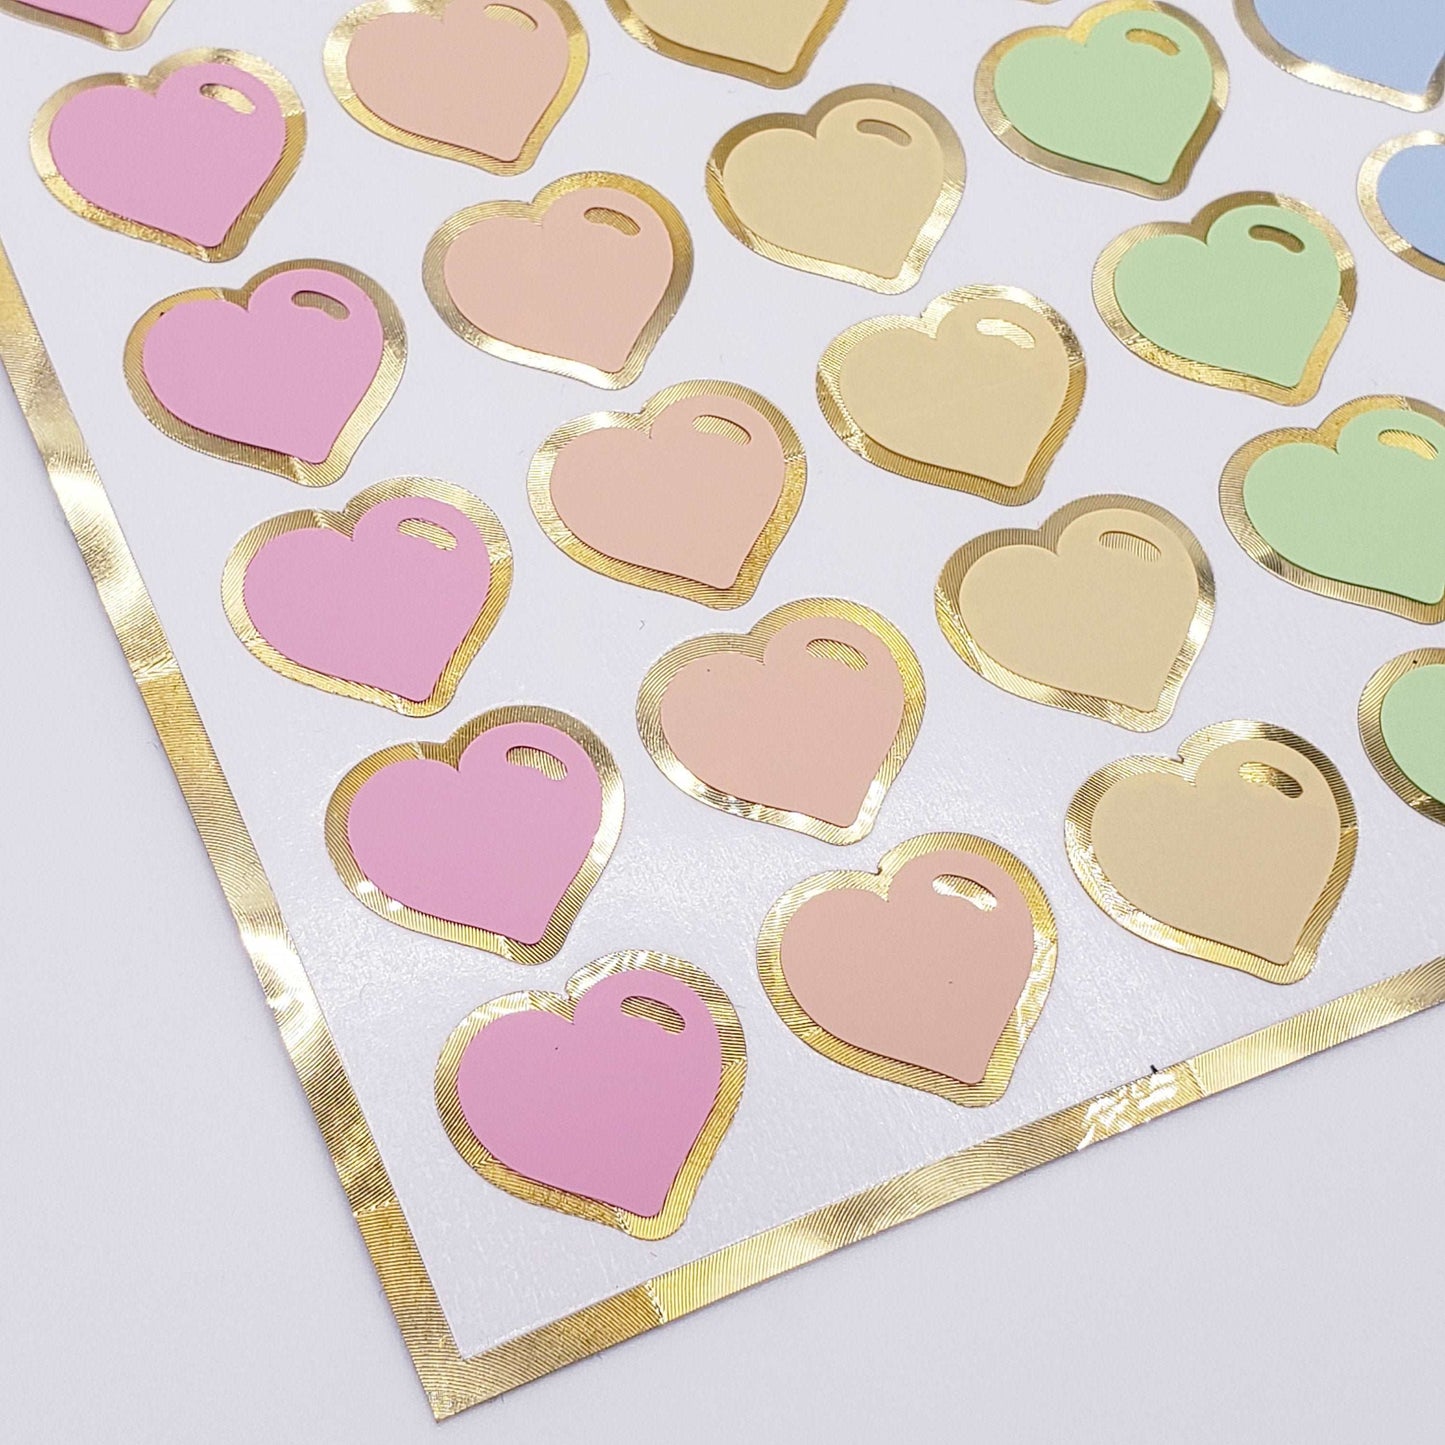 Pastel Rainbow Heart Stickers for Valentine's Day Cards and envelopes, set of 60 small heart decals for journals, notes and scrapbooks.